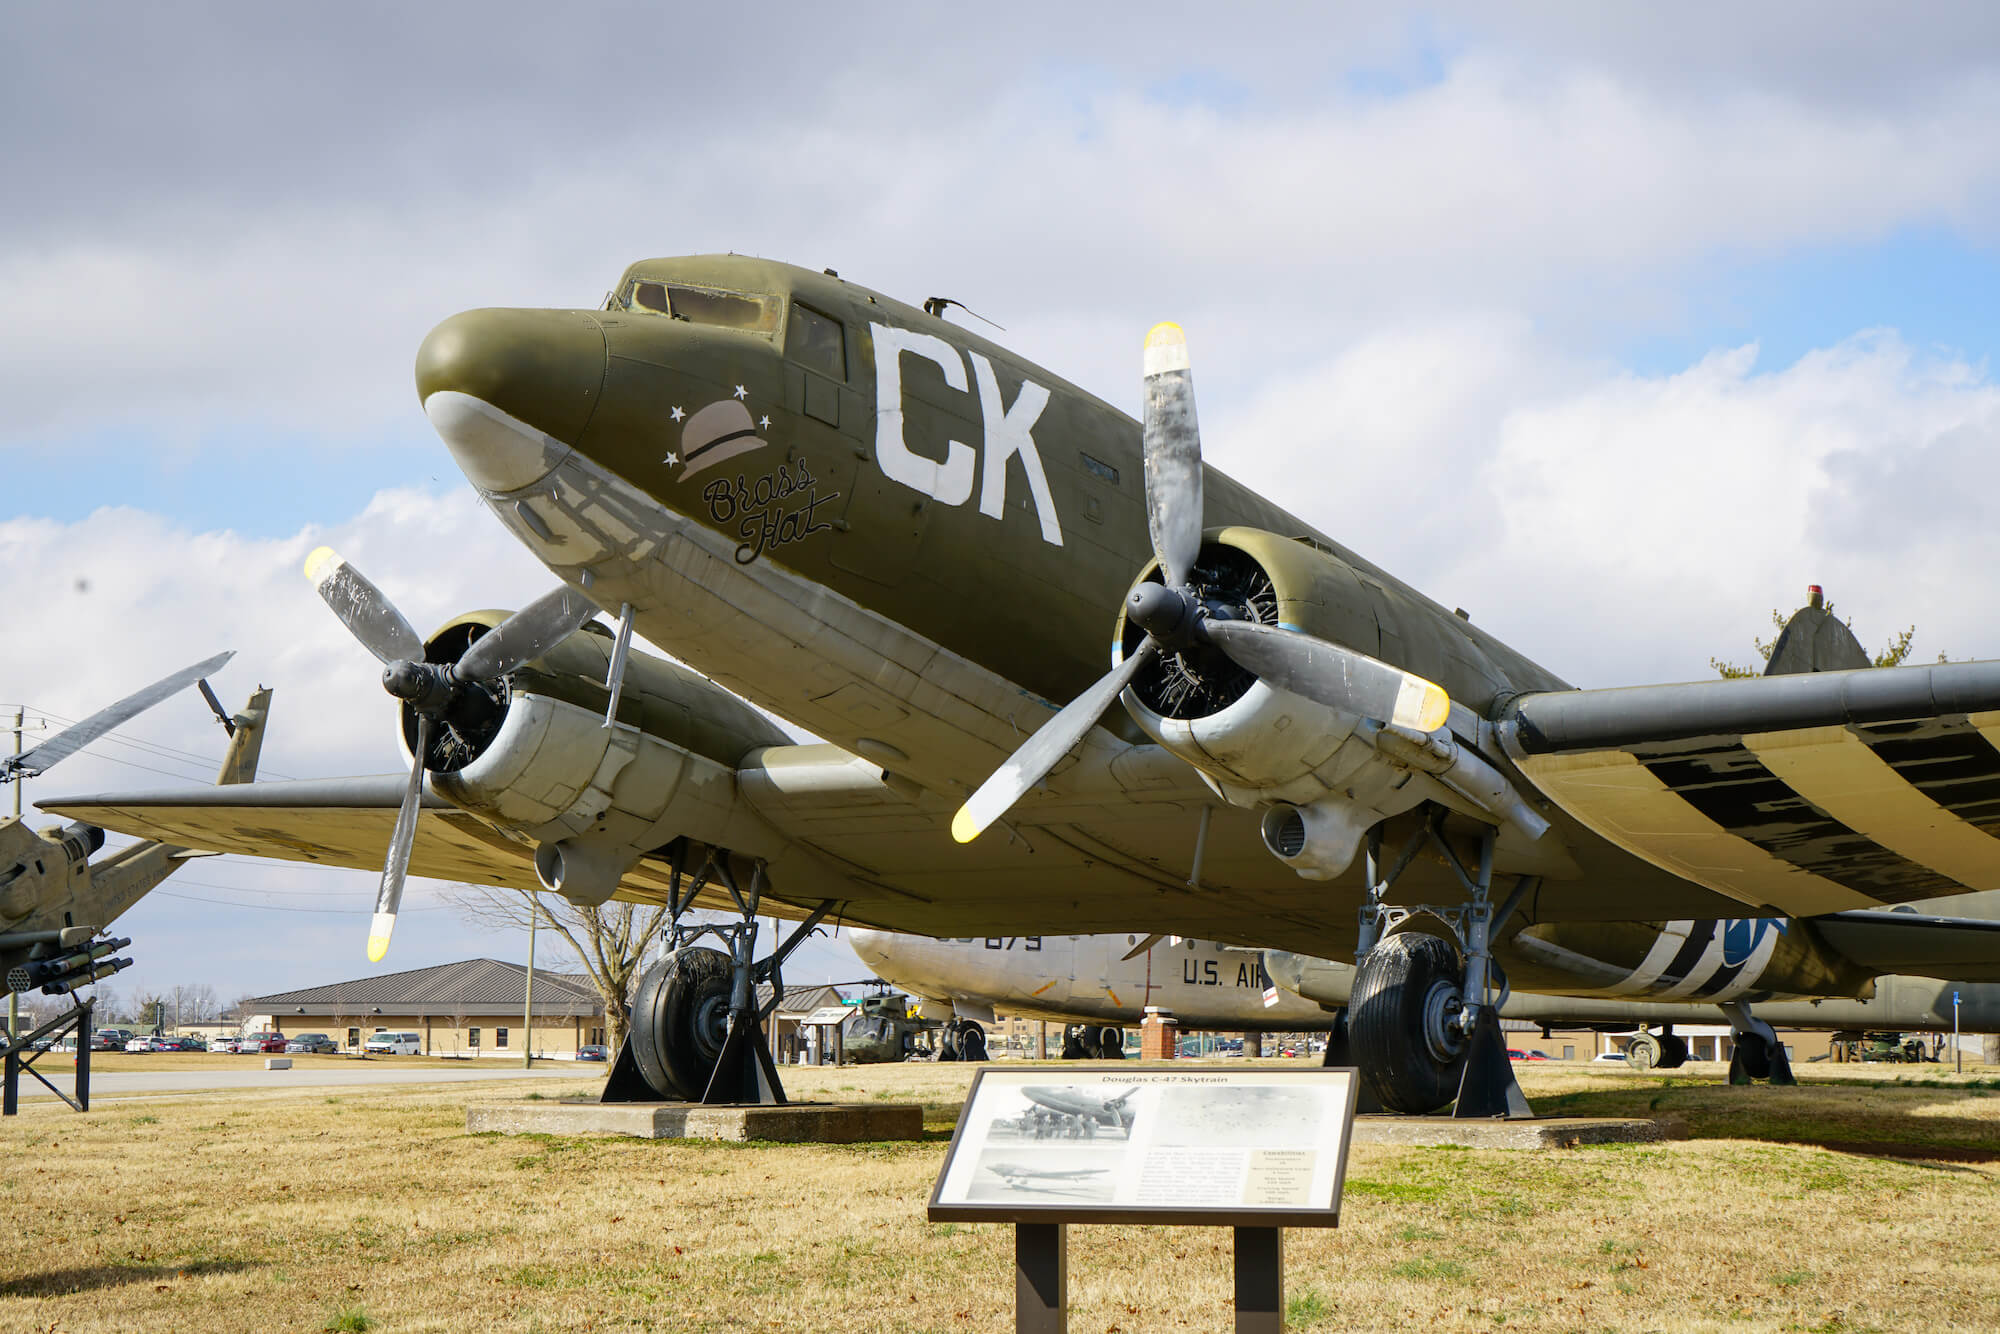 “Brass Hat”—a fully restored C-47 aircraft at Fort Campbell in KY